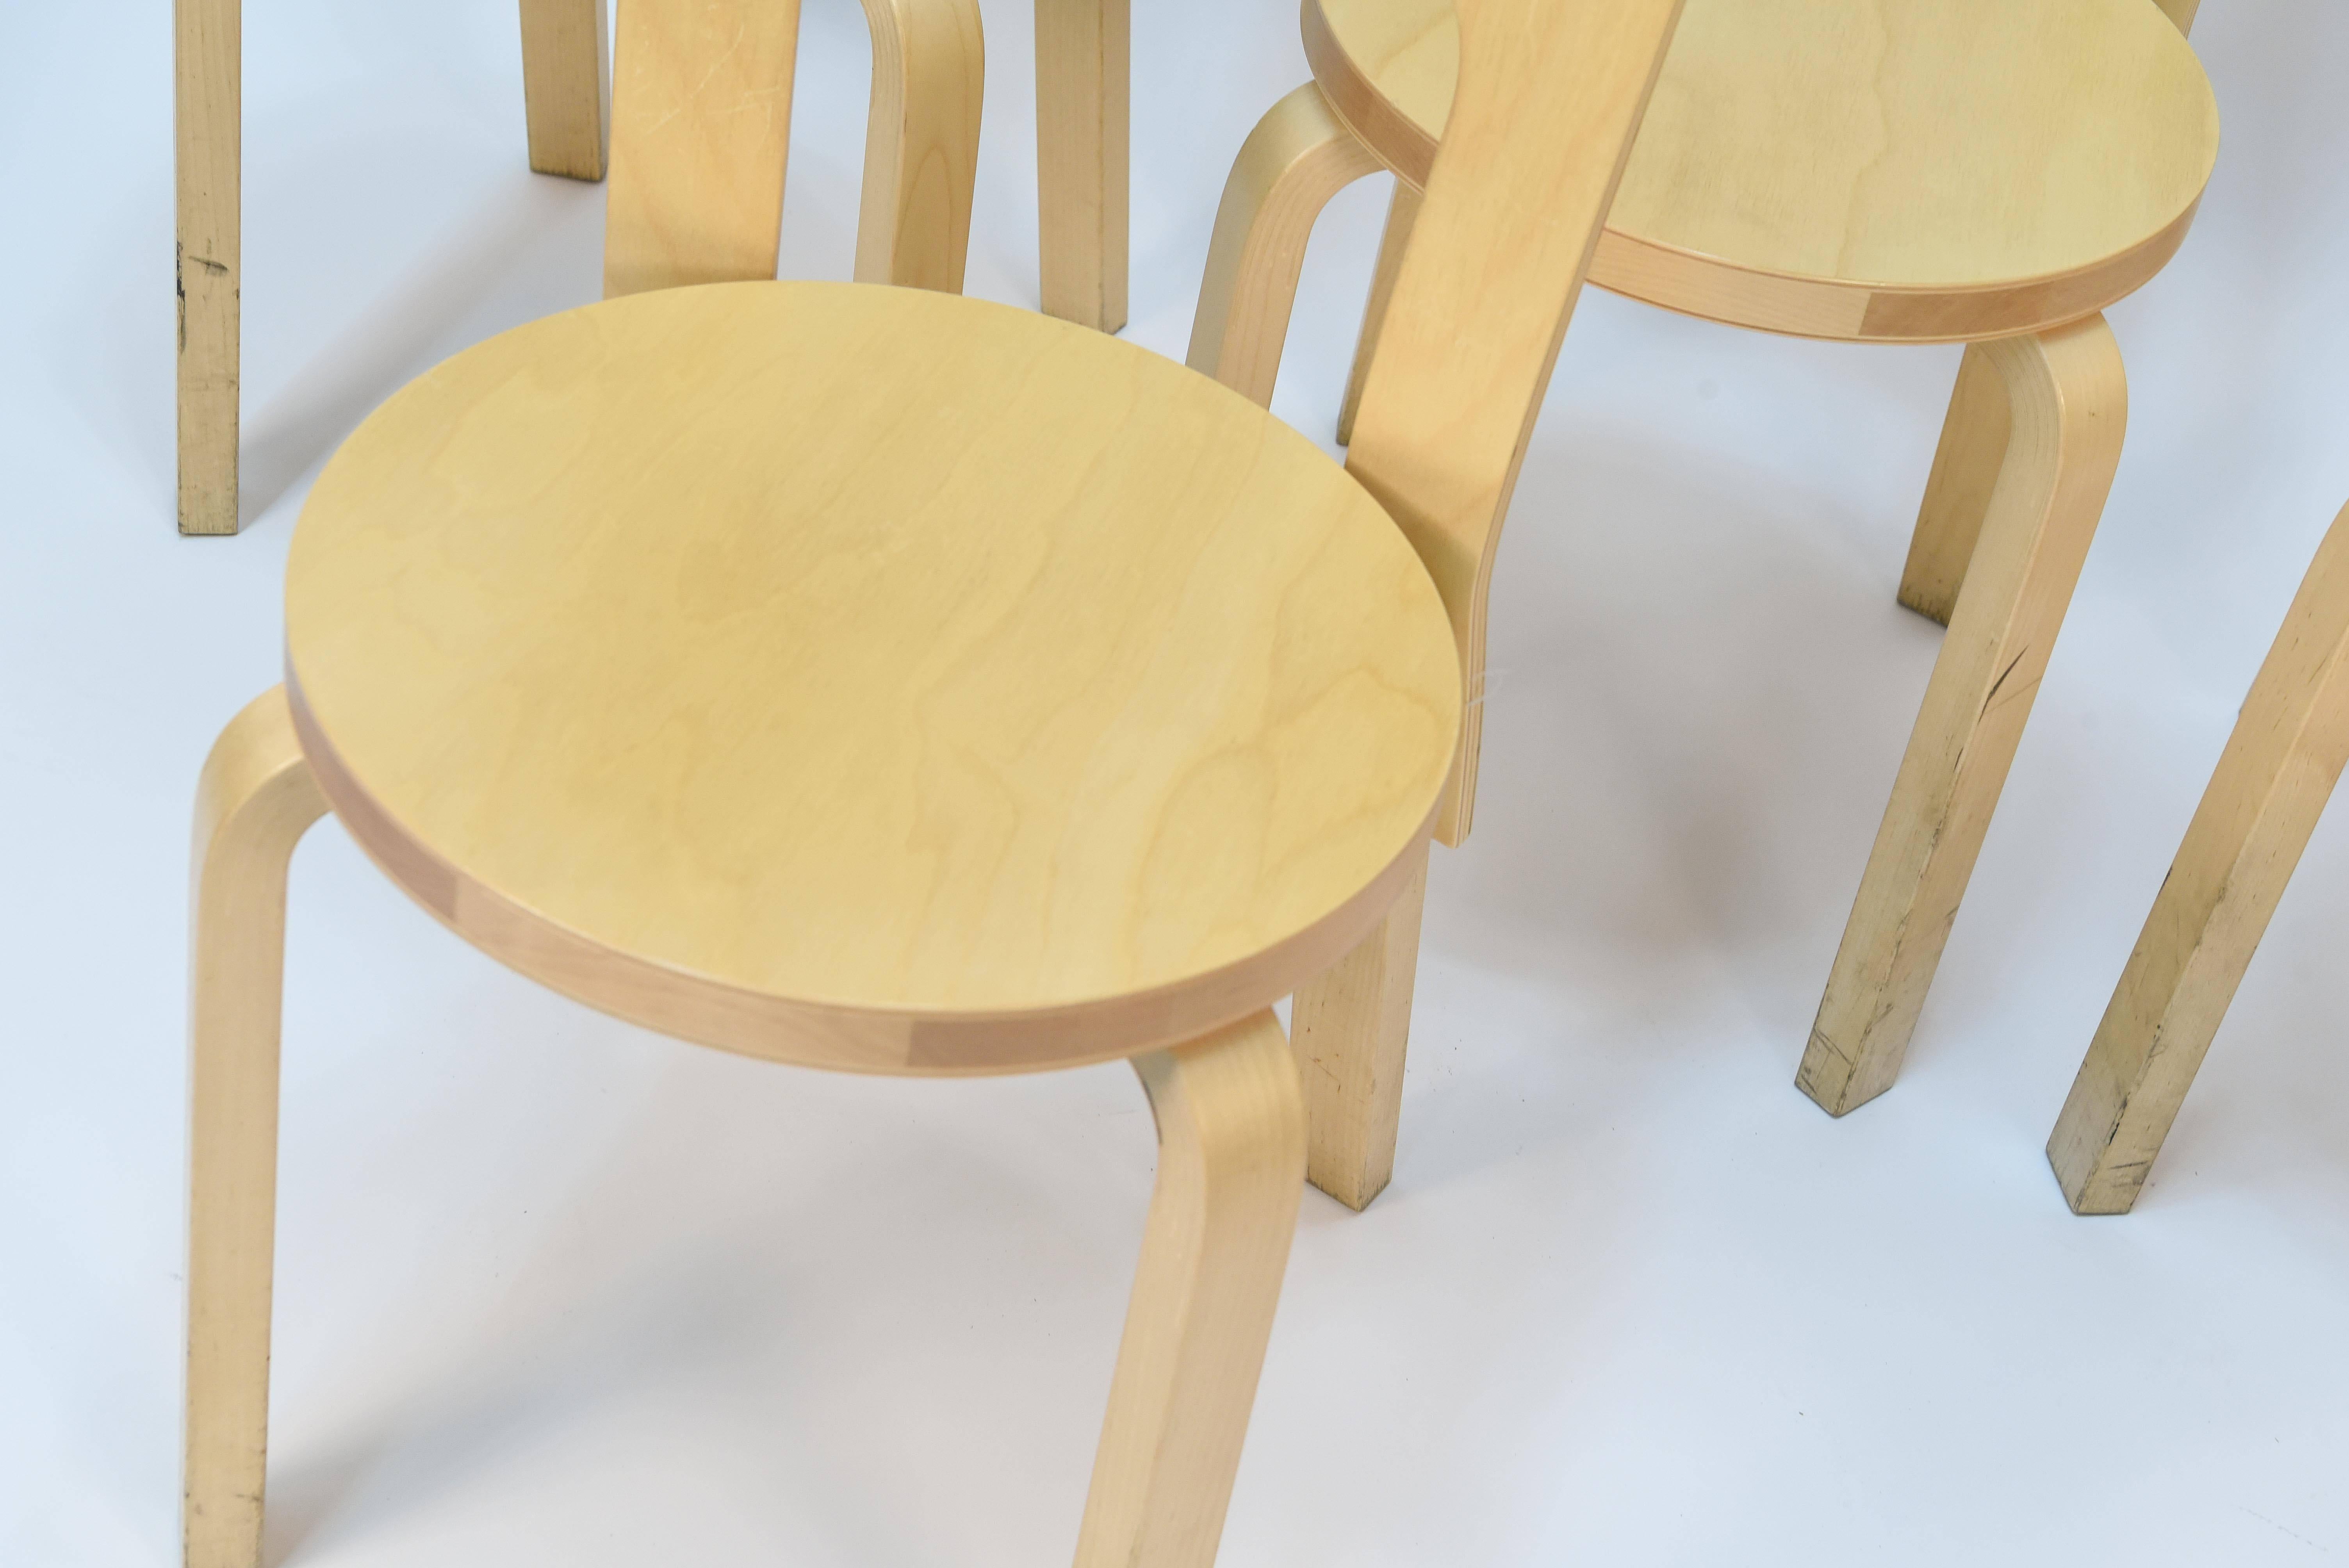 Tagged on bottom. Made in Finland by Artek, a furniture company founded by Alvar Aalto in 1935. The 66 chair is in the permanent collection of The Museum of Modern Art, New York. With a simple yet attractive design, the 66 chair can work nicely in